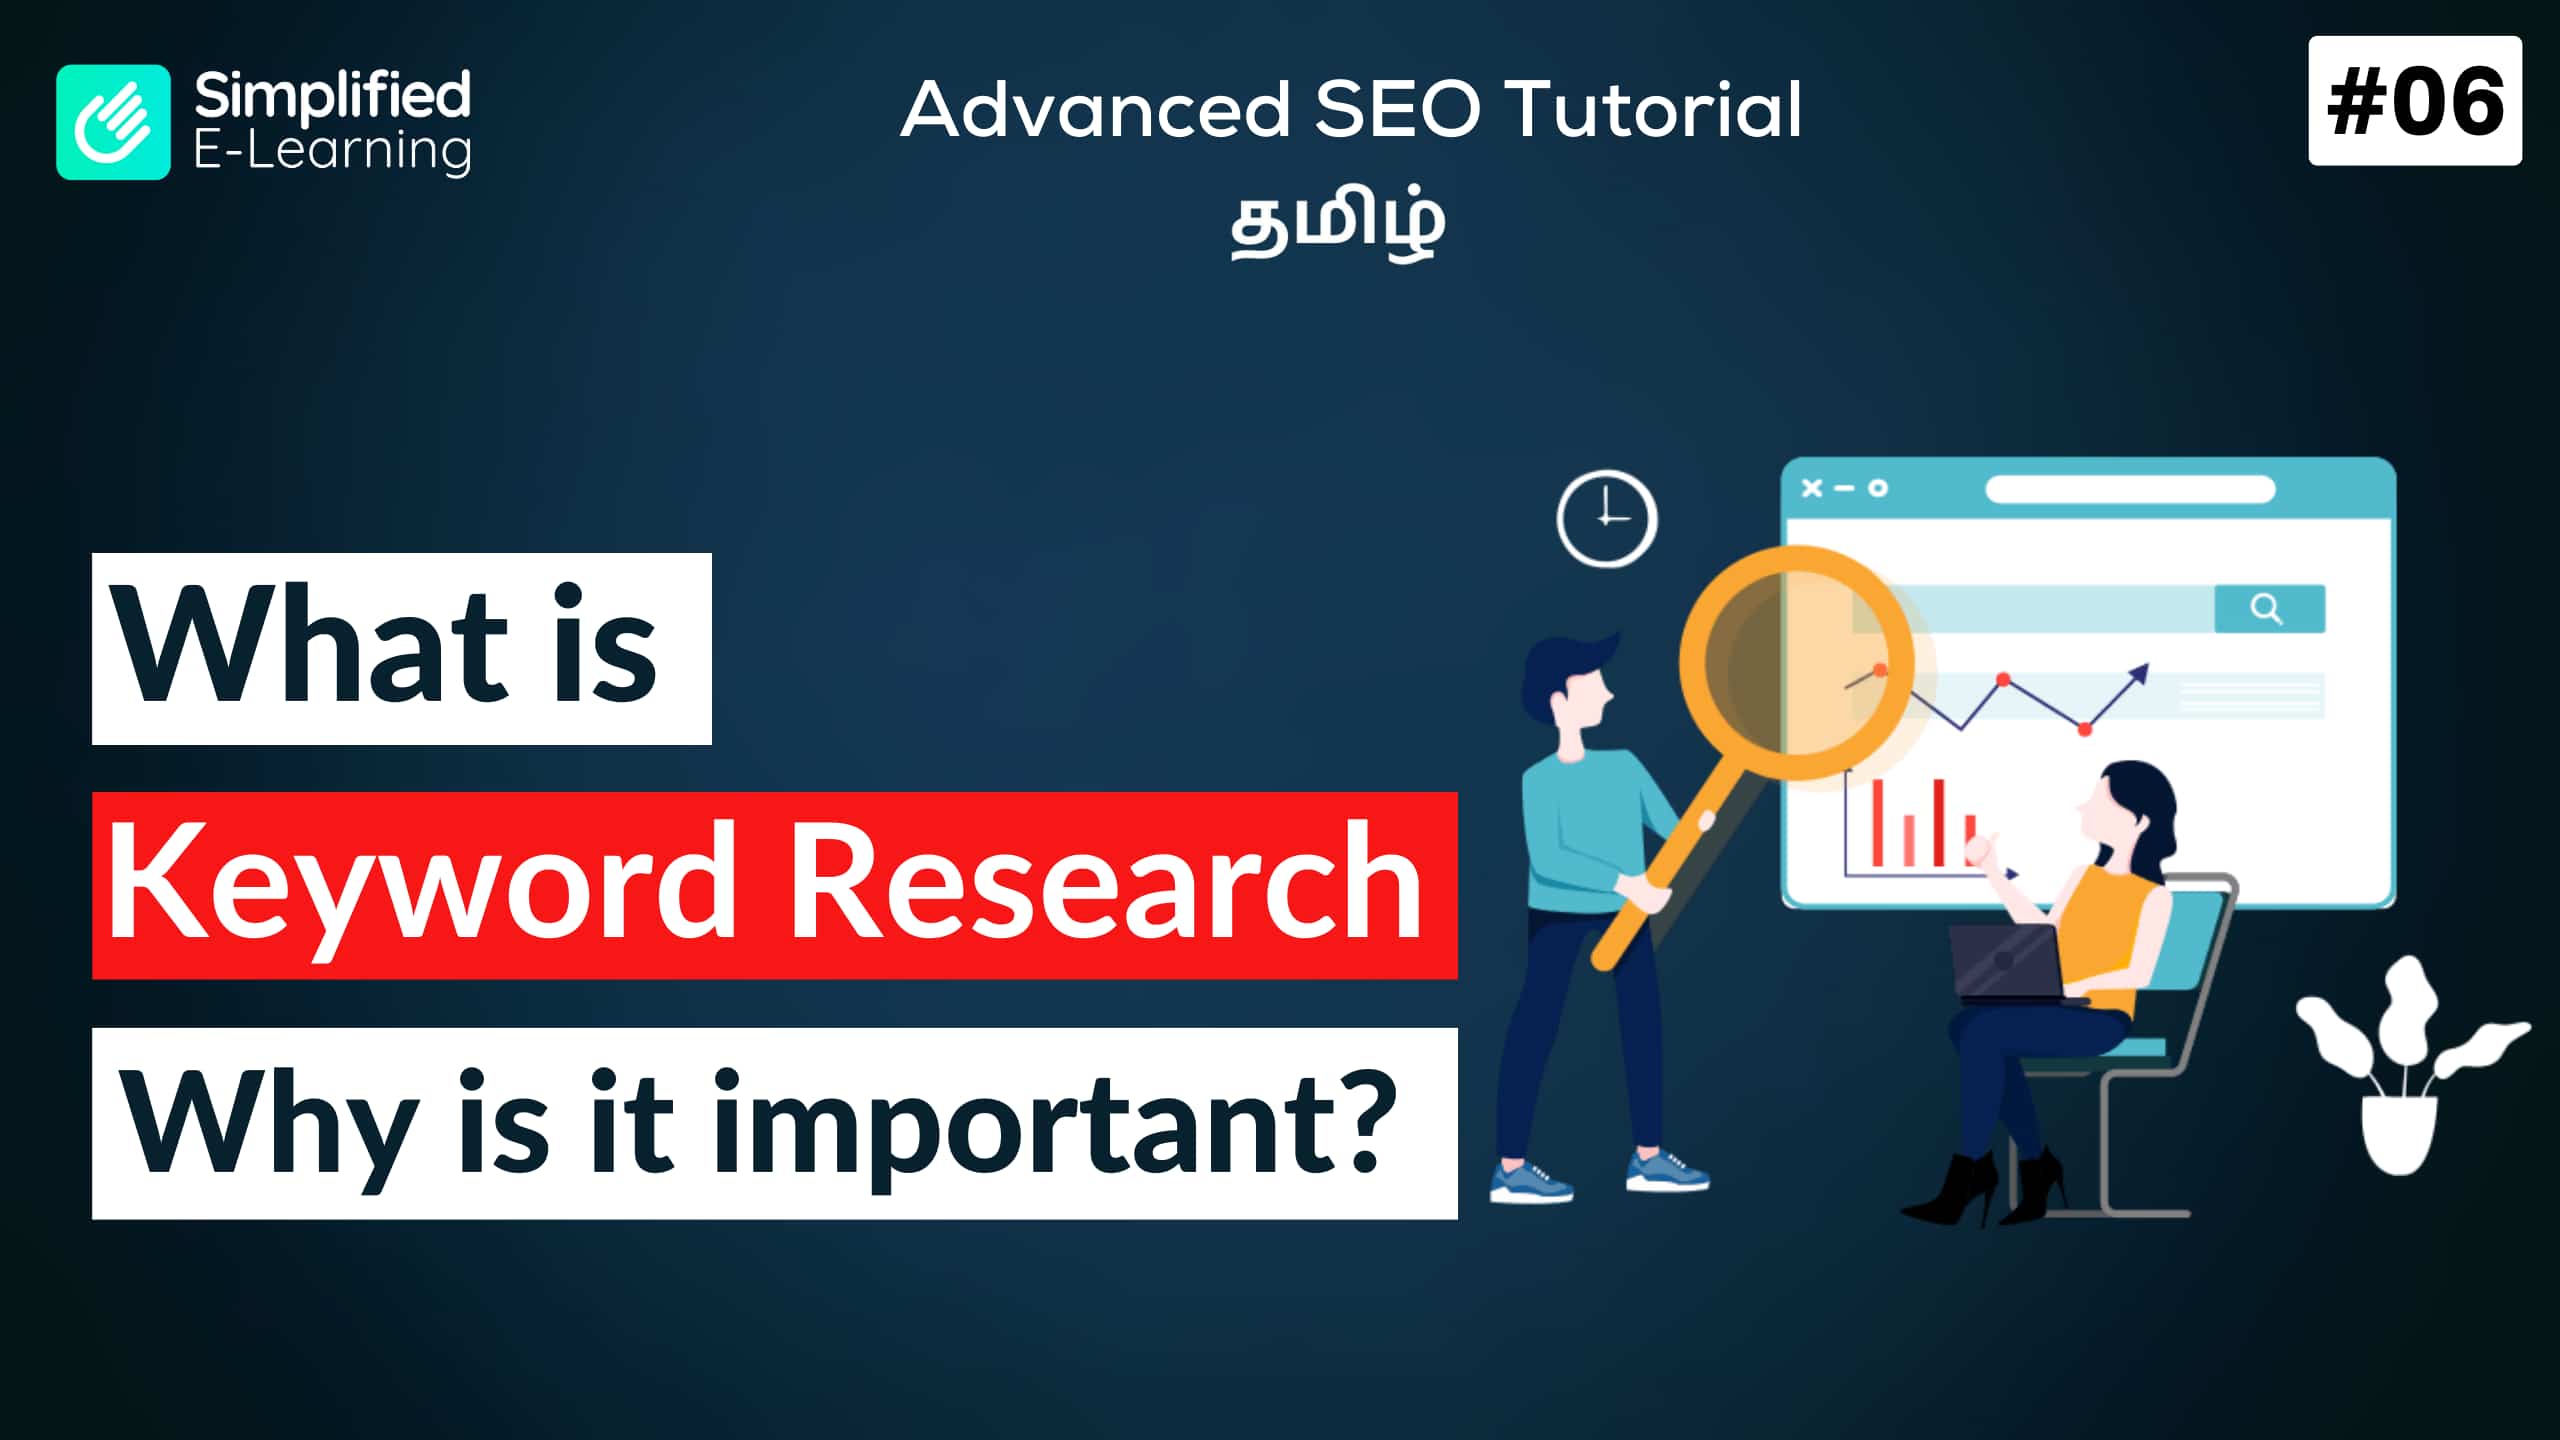 What is Keyword Research